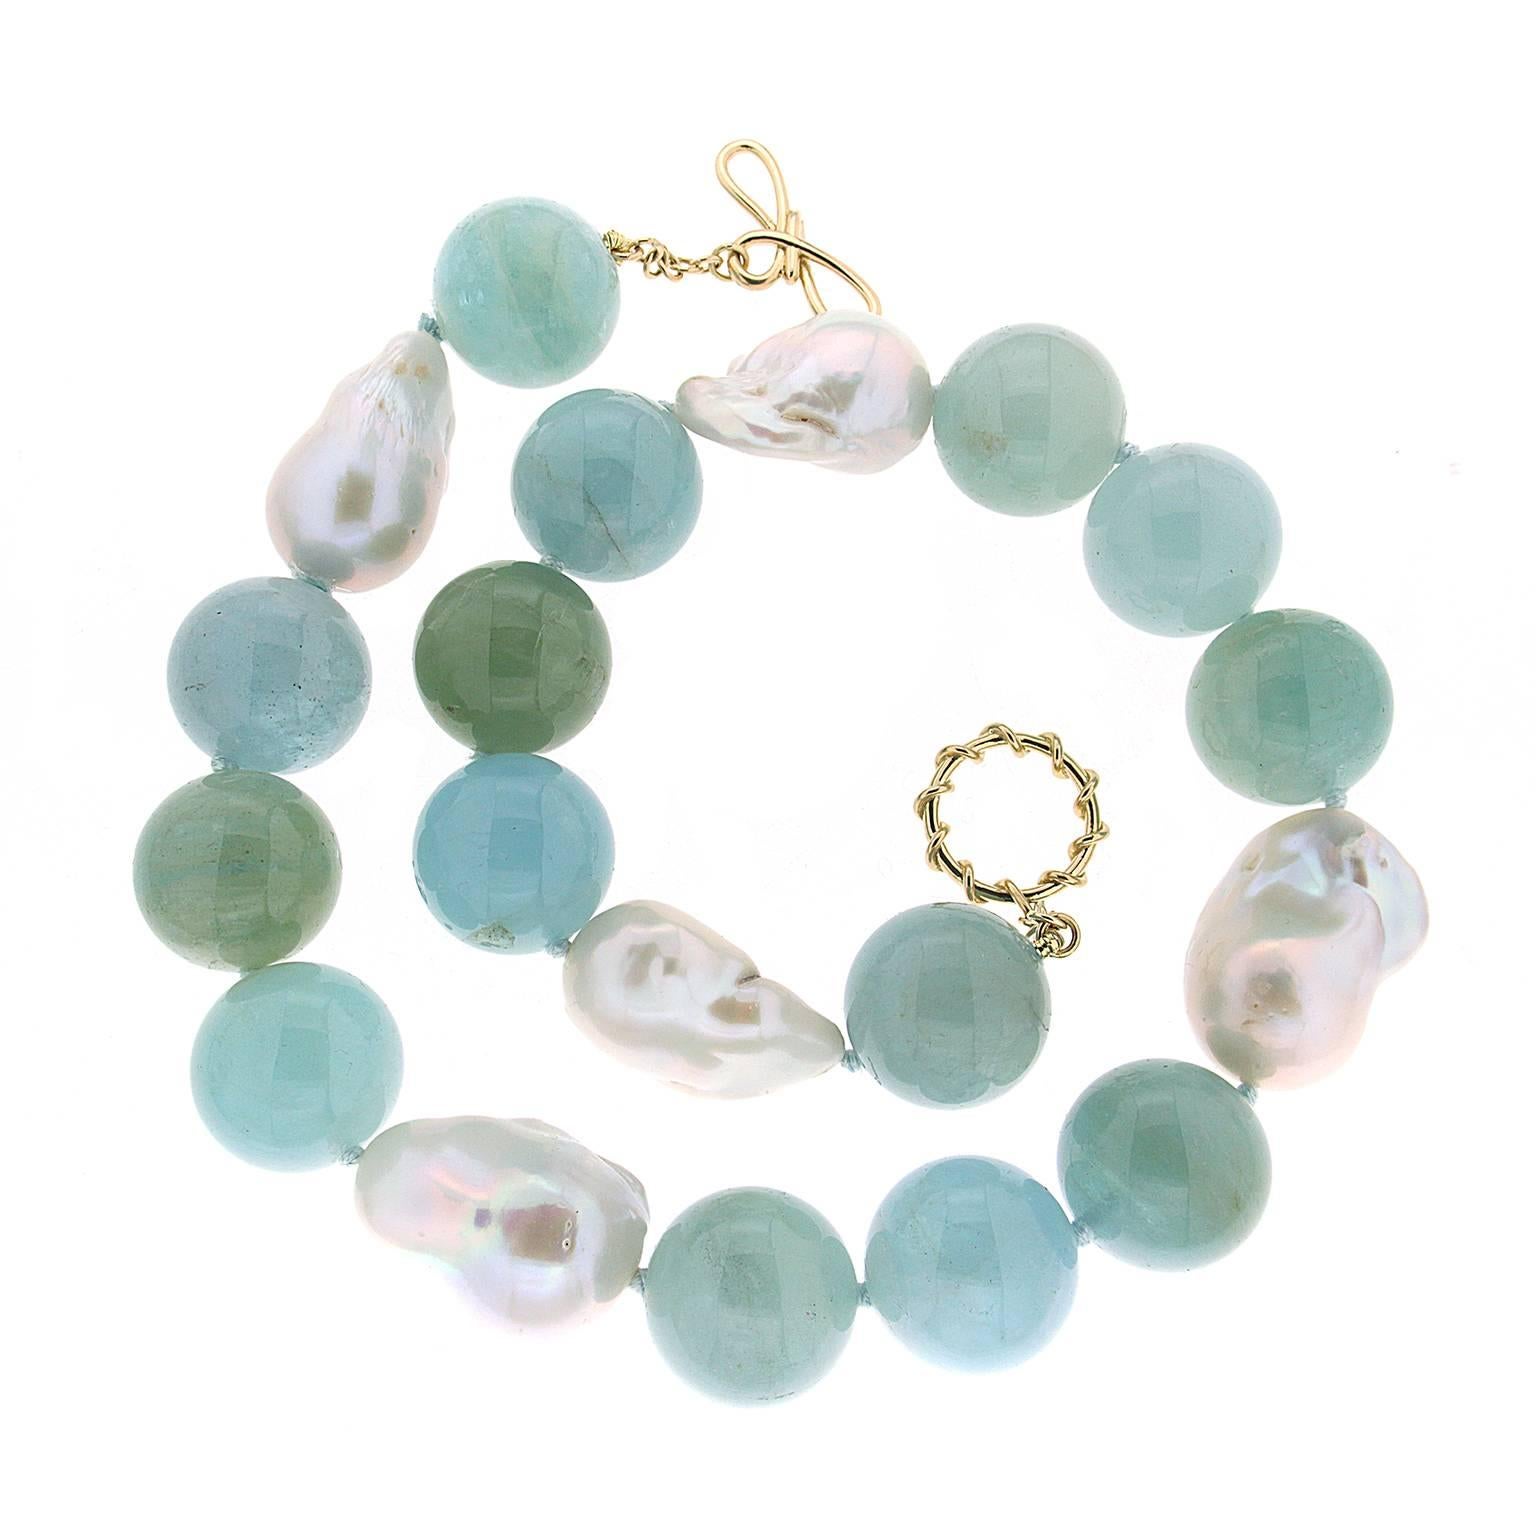 Valentin Magro Aquamarine Ball and Freshwater Pearls Necklace